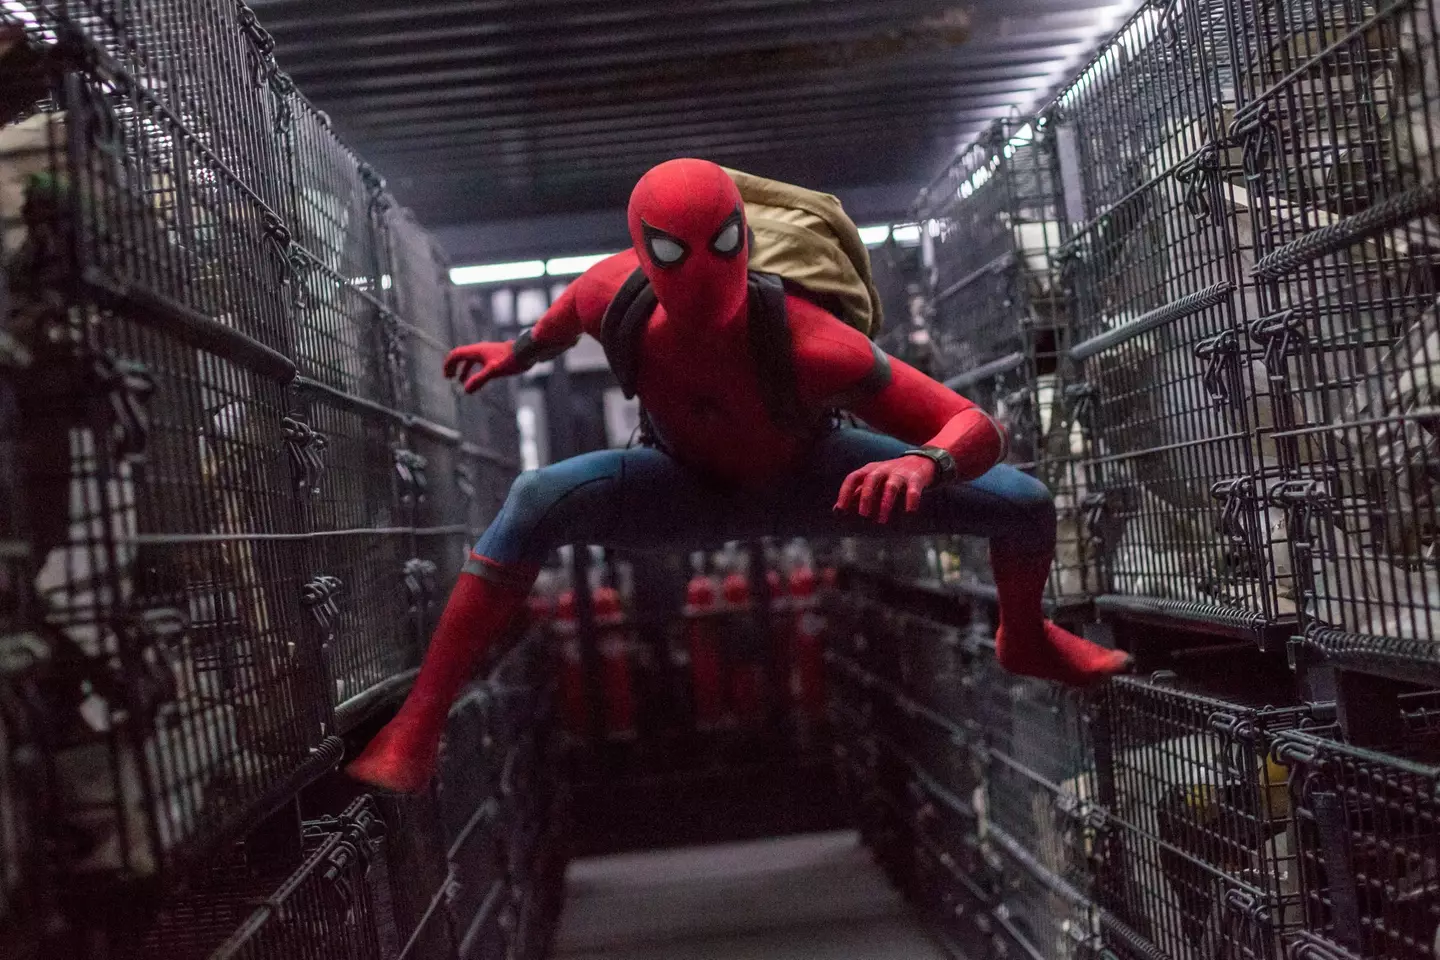 Tom Holland's Spider-Man could be back for a fourth movie.